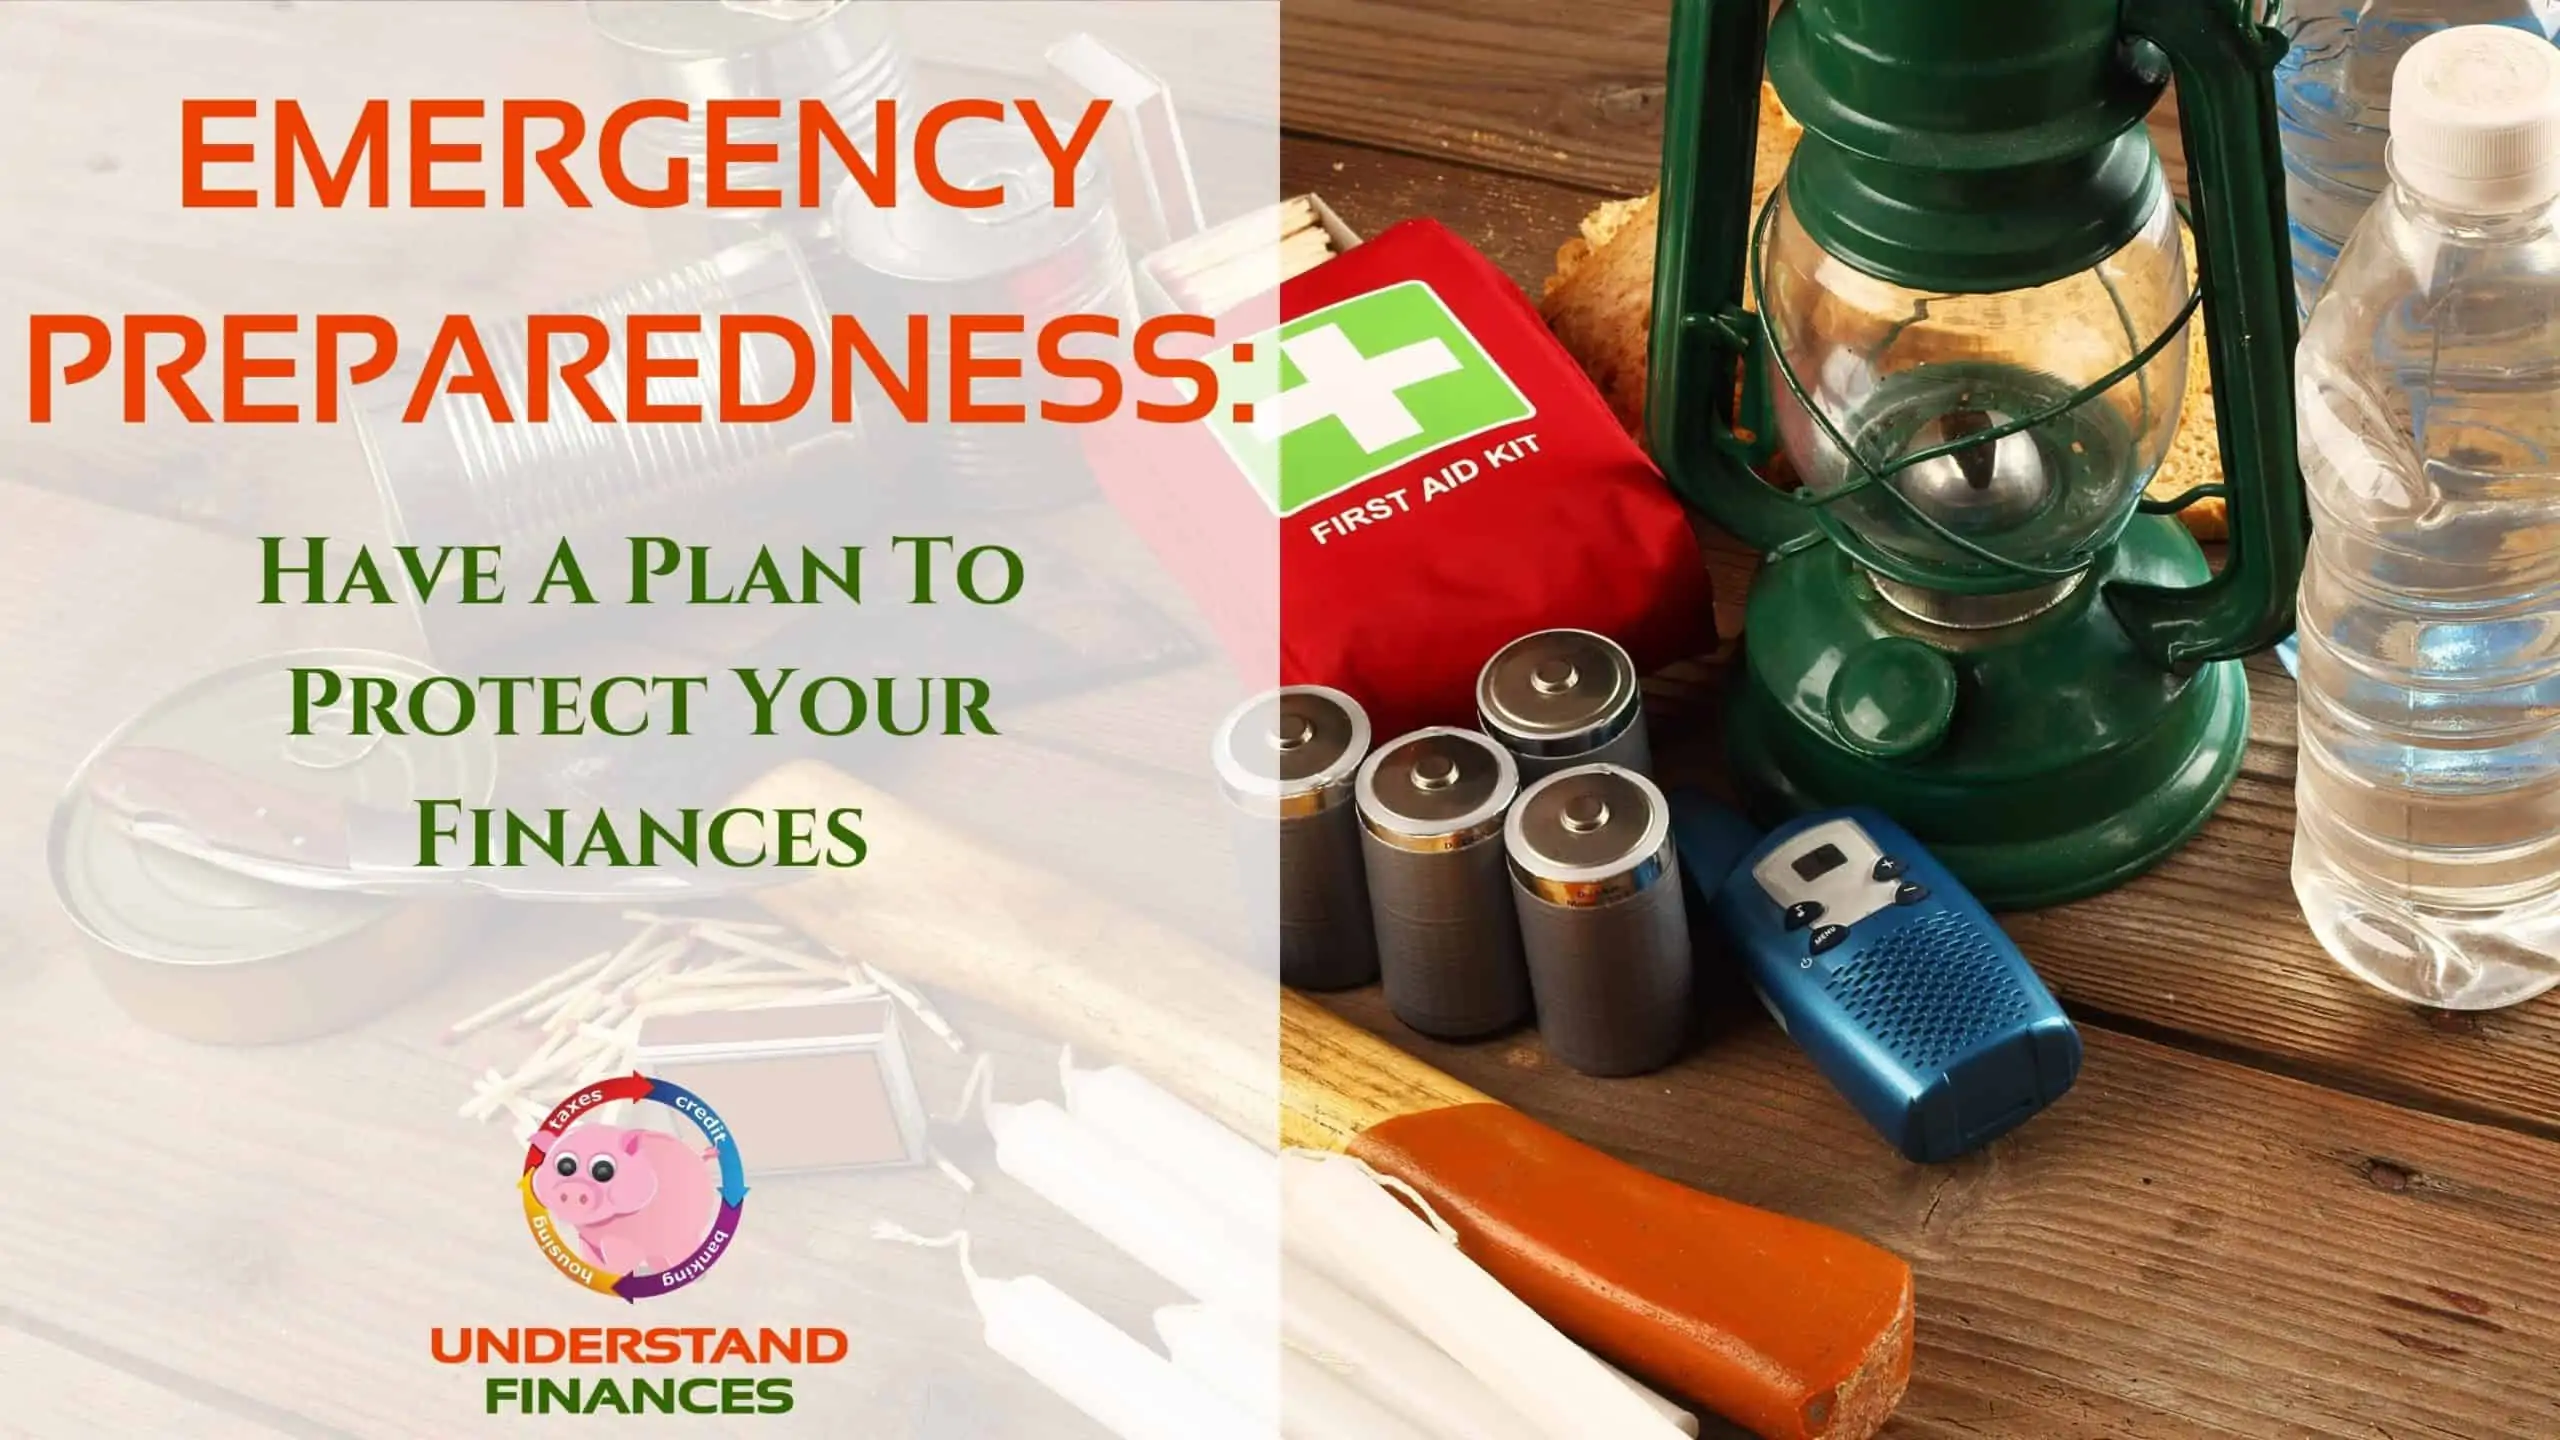 Emergency Preparedness: Have a Plan To Protect Your Finances